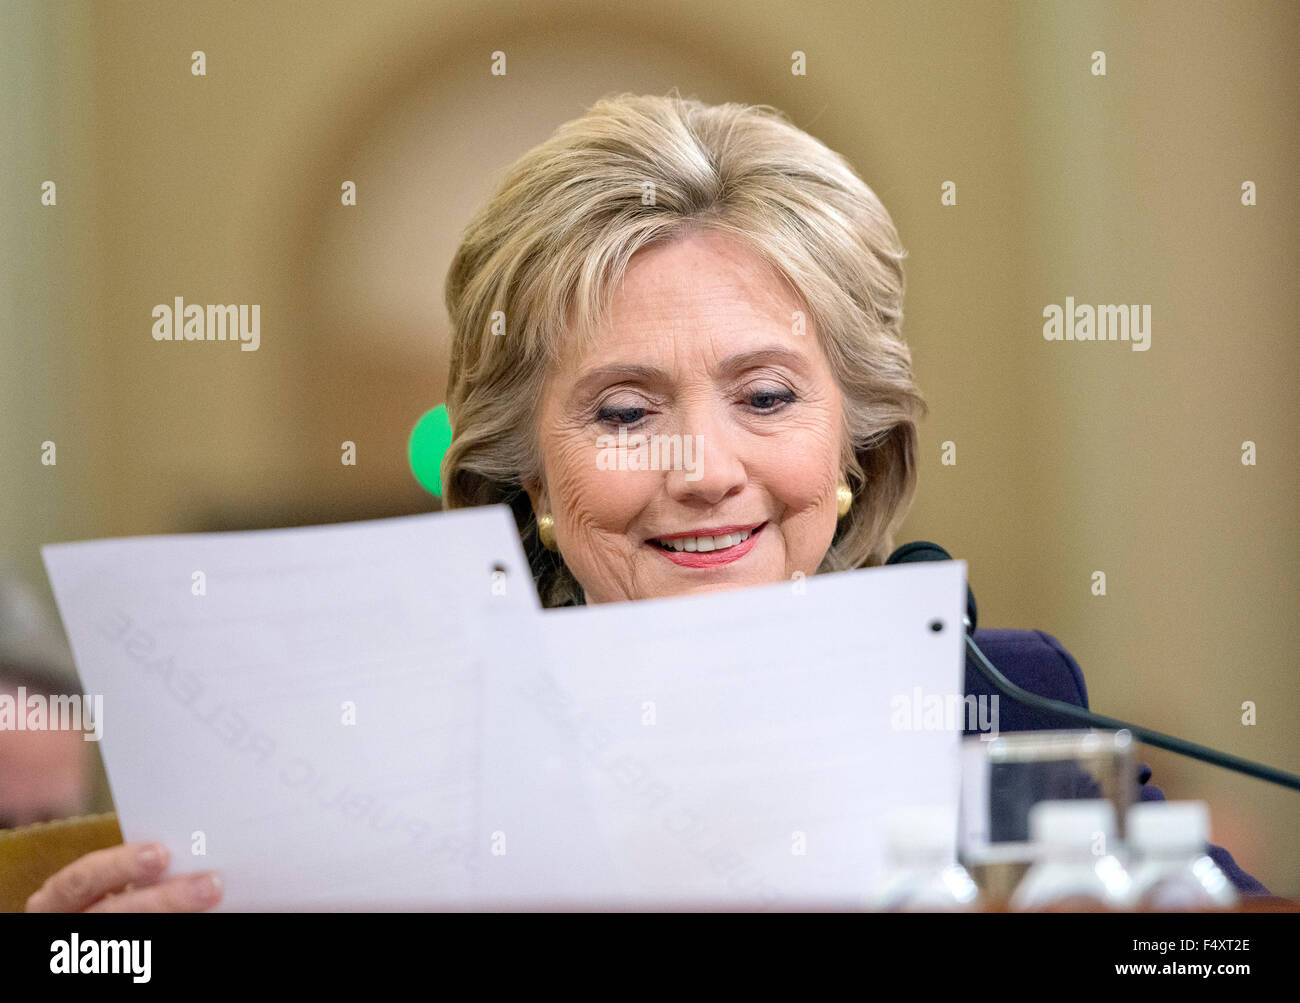 Washington DC, USA. 22nd Oct, 2015. Former United States Secretary of State Hillary Rodham Clinton, a candidate for the 2016 Democratic Party nomination for President of the United States, smiles as she reads a memo from Ambassador J. Christopher Stevens, the US envoy to Libya who was killed in the terror attack in Bengazi on September 11, 2012 as she testfies before the US House Select Committee on Benghazi on Capitol Hill in Washington, DC on Thursday, October 22, 2015. Credit: Ron Sachs/CNP (RESTRICTION: NO New York or New Jersey Newspapers or newspapers within a 75 mile radius of New York  Stock Photo